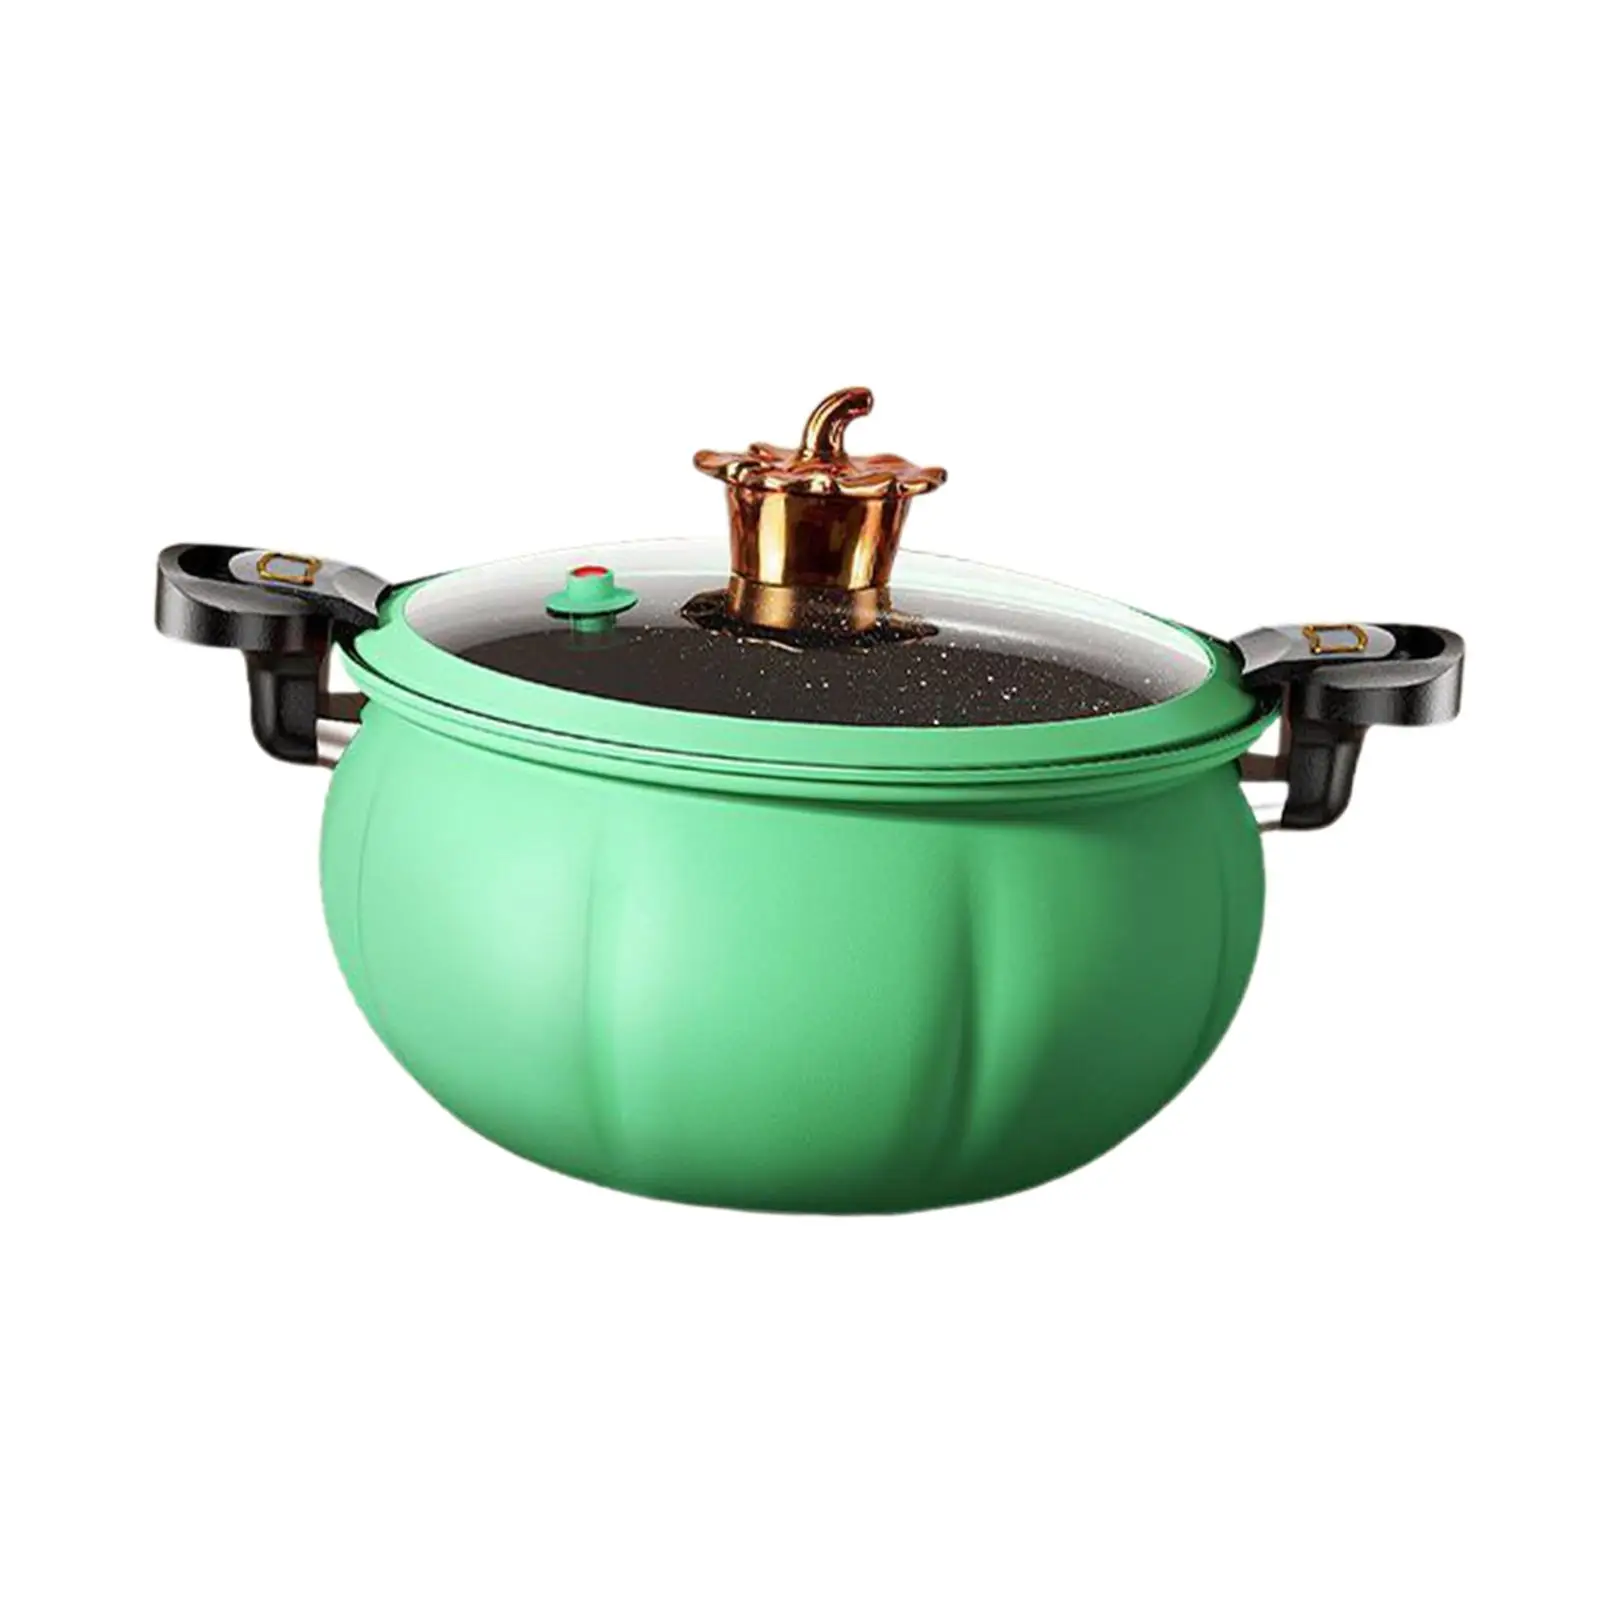 Cast Iron Rice Cooking Steamer Cookware Slow Cooker Pressure Stew Pot for Open Fire Picnics Outdoor Camping Parties